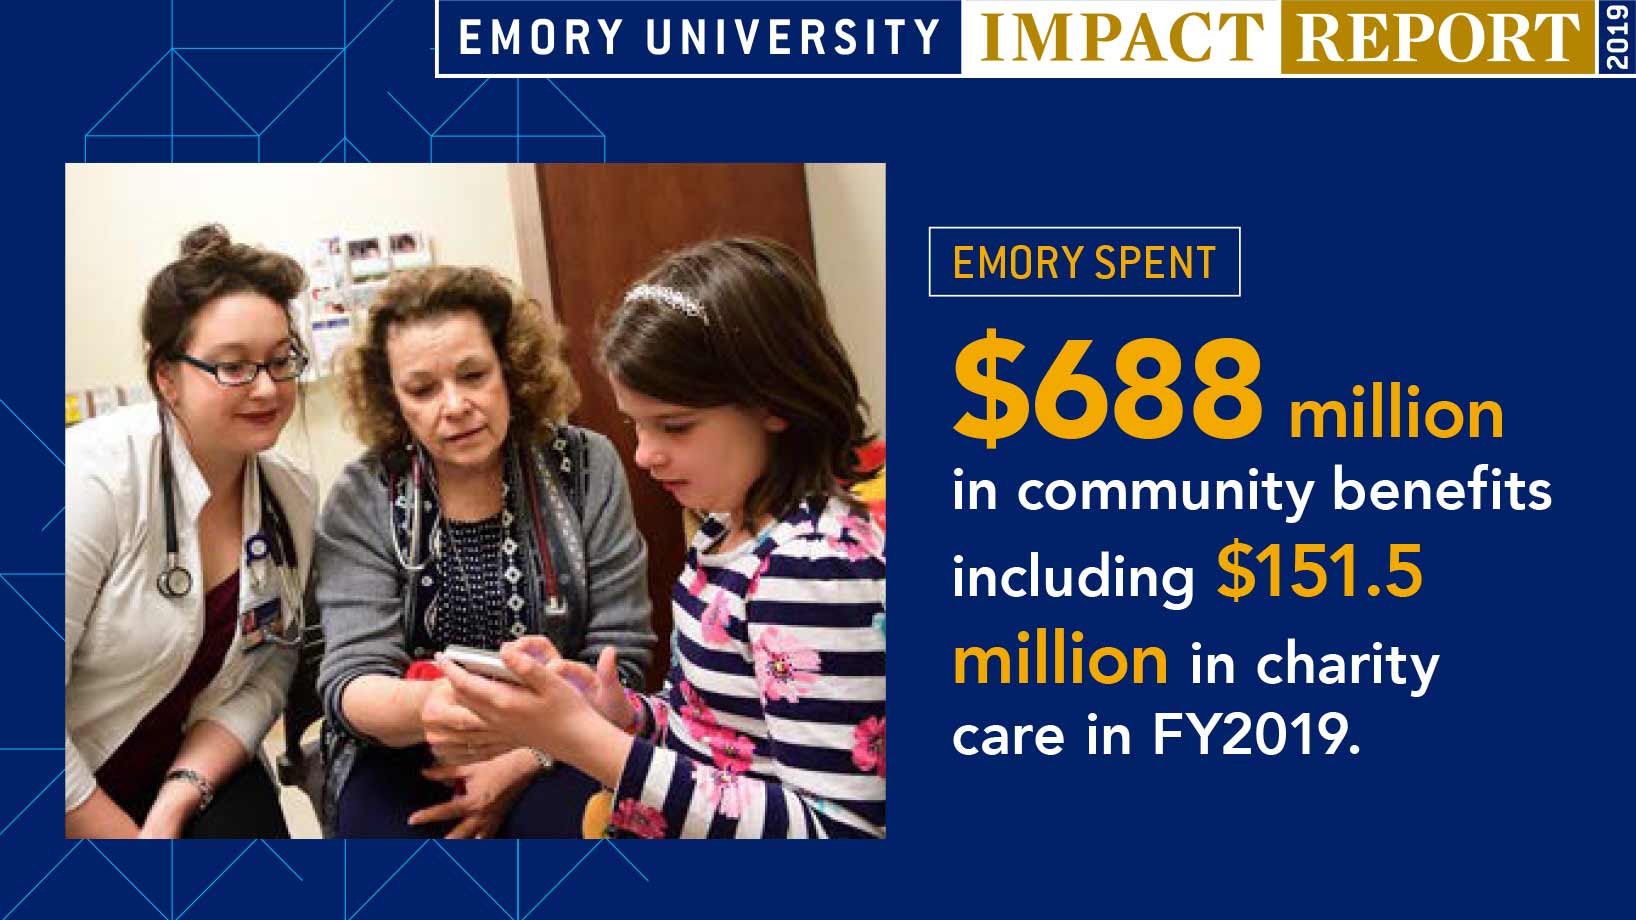 Emory spent $688 million in community benefits including $151.5 million in charity care in FY2019